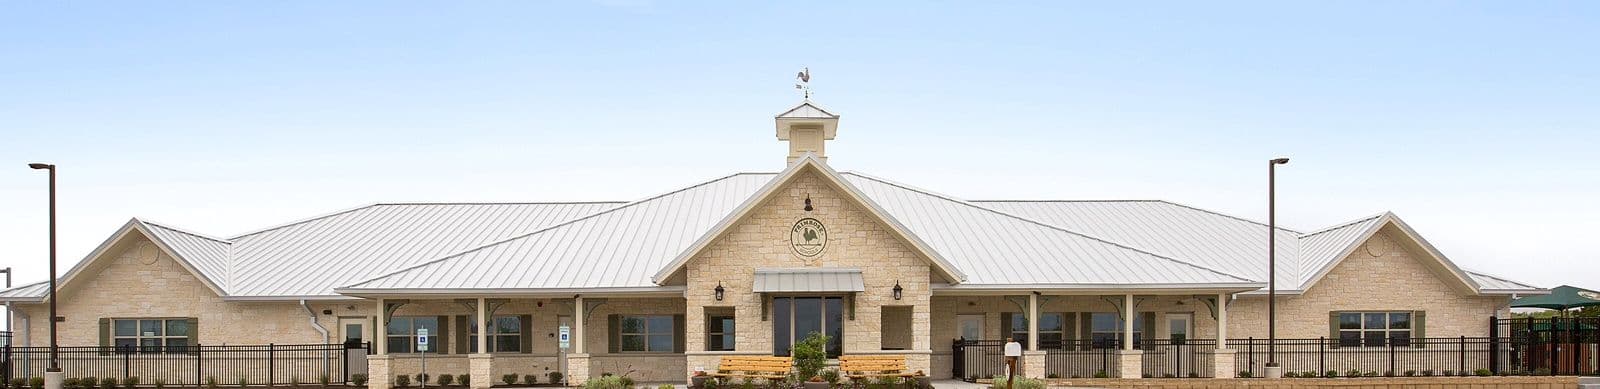 Exterior of a Primrose School of Dripping Springs